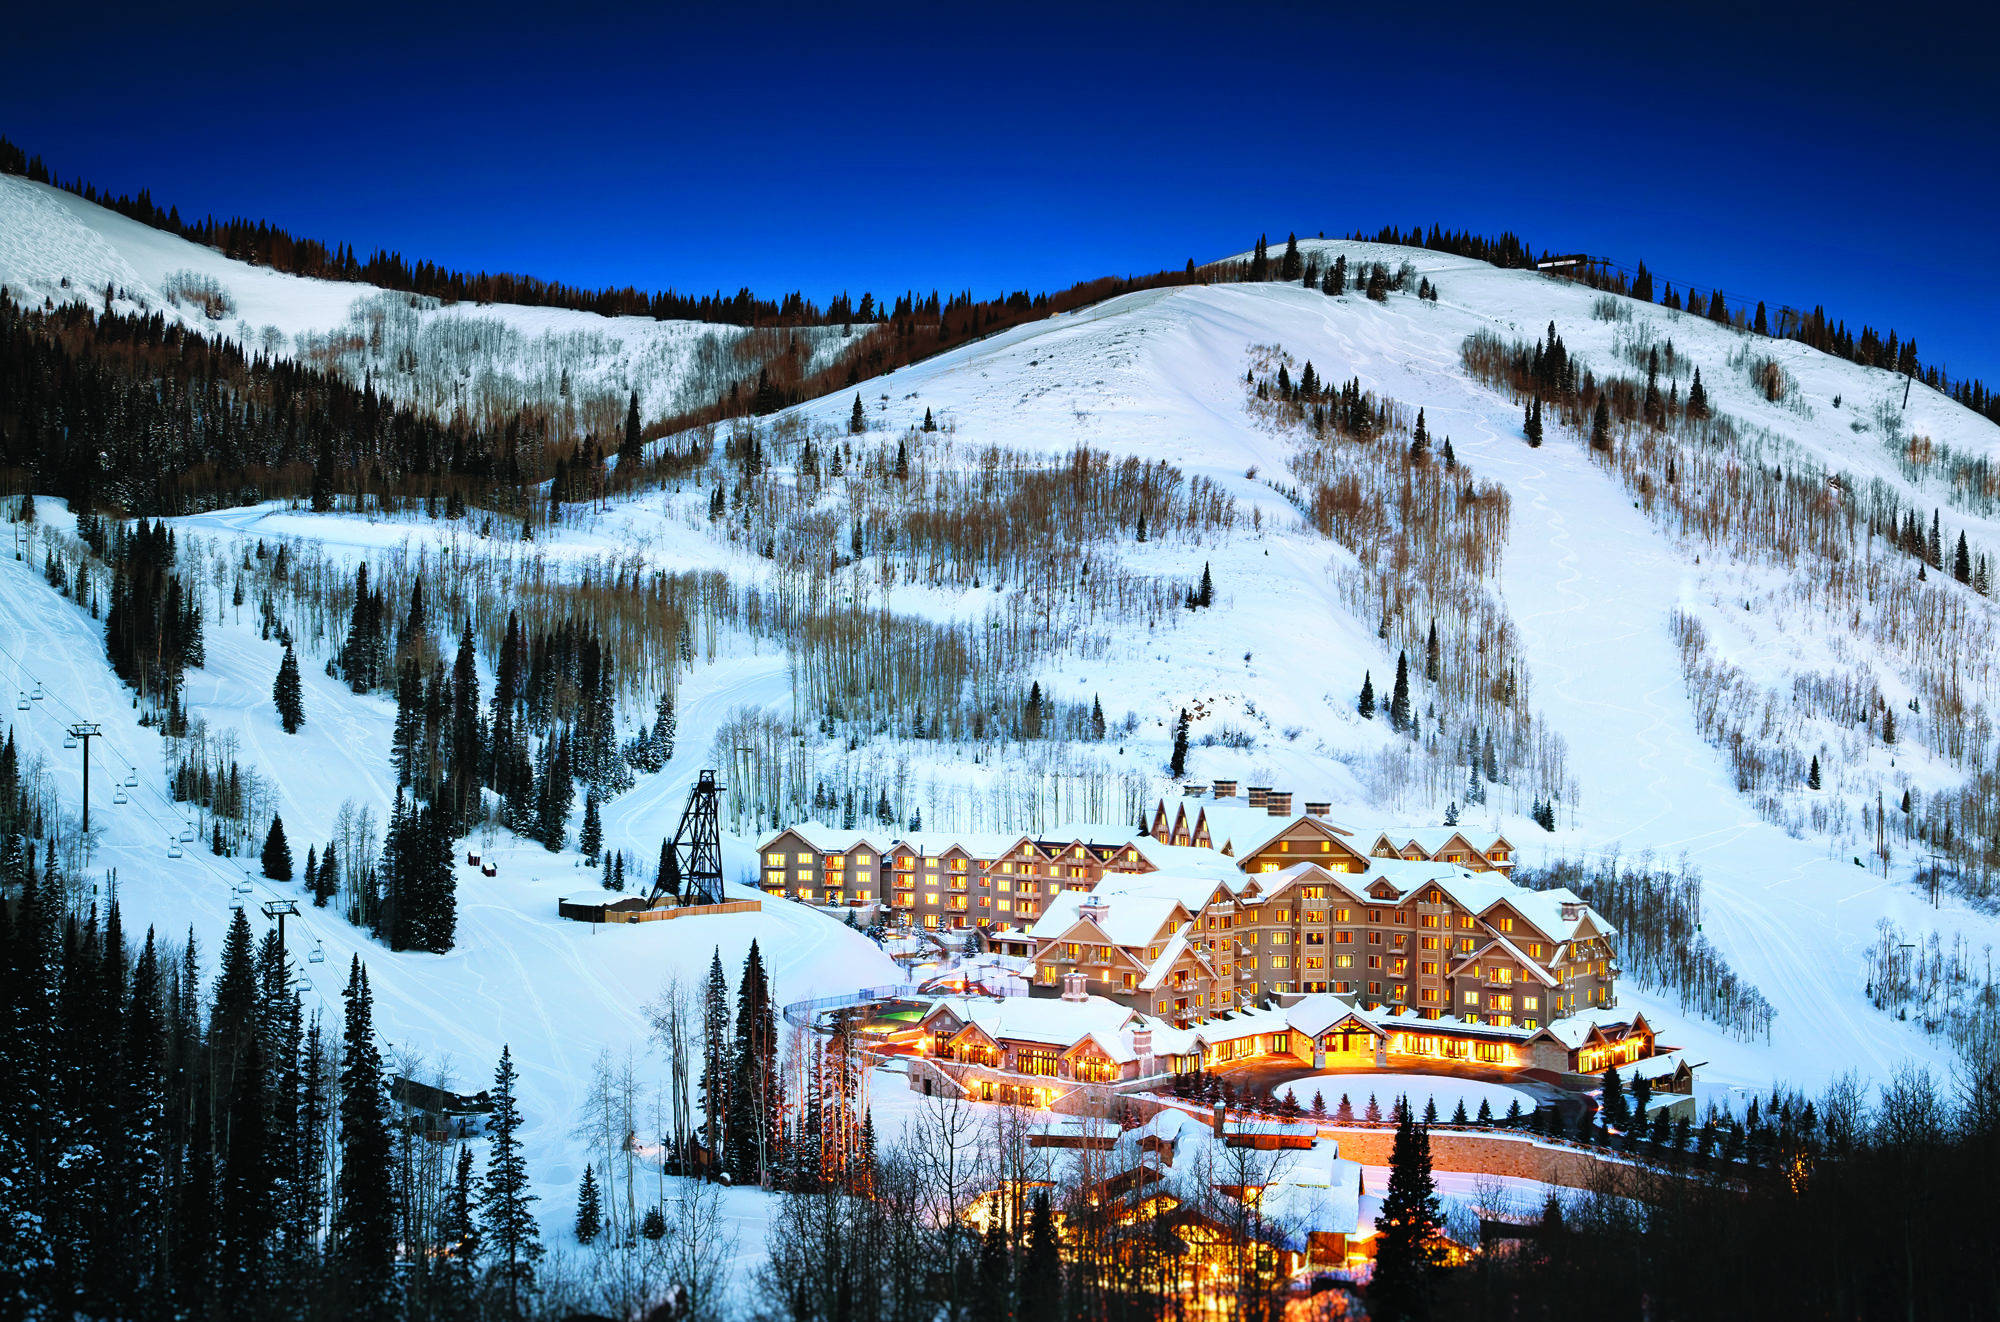 https://www.sunset.com/wp-content/uploads/christmas-vacation-packages-montage-deer-valley-pr-1119-2000x1322.jpg